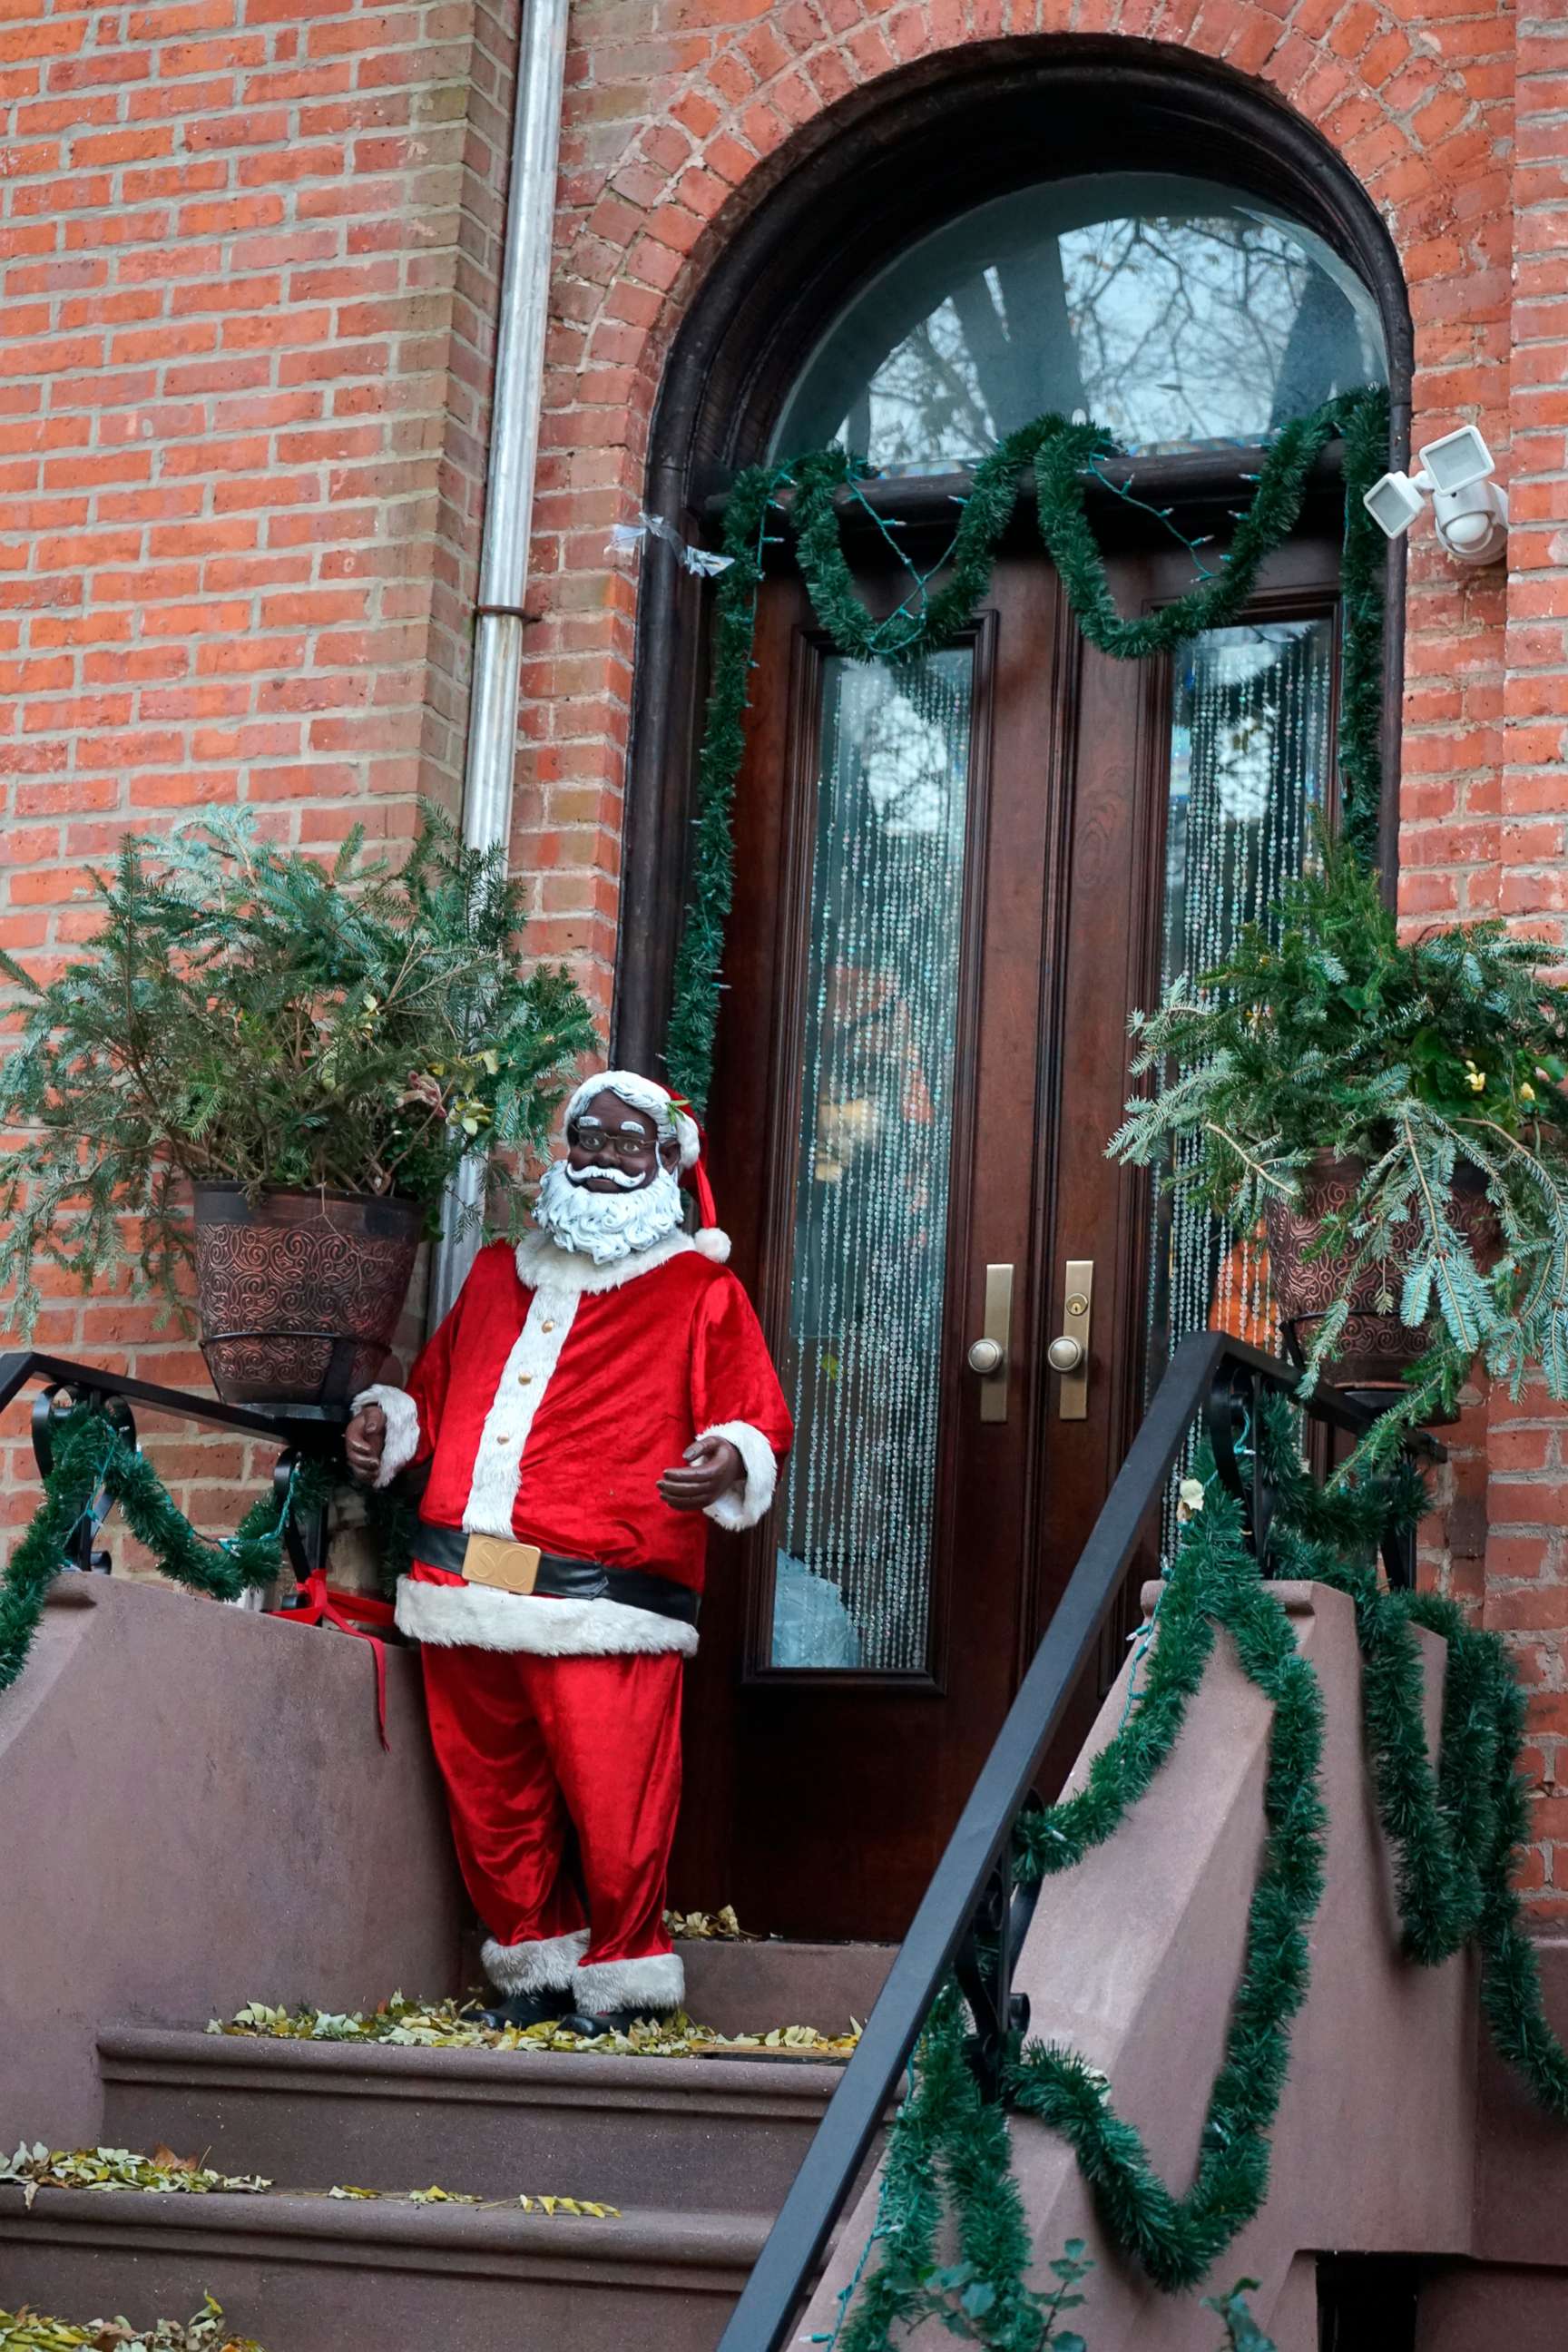 PHOTO: In this Dec. 13, 2021, file photo, a Black Santa is seen on a brownstone stoop in the Clinton Hill neighborhood of Brooklyn, N.Y.